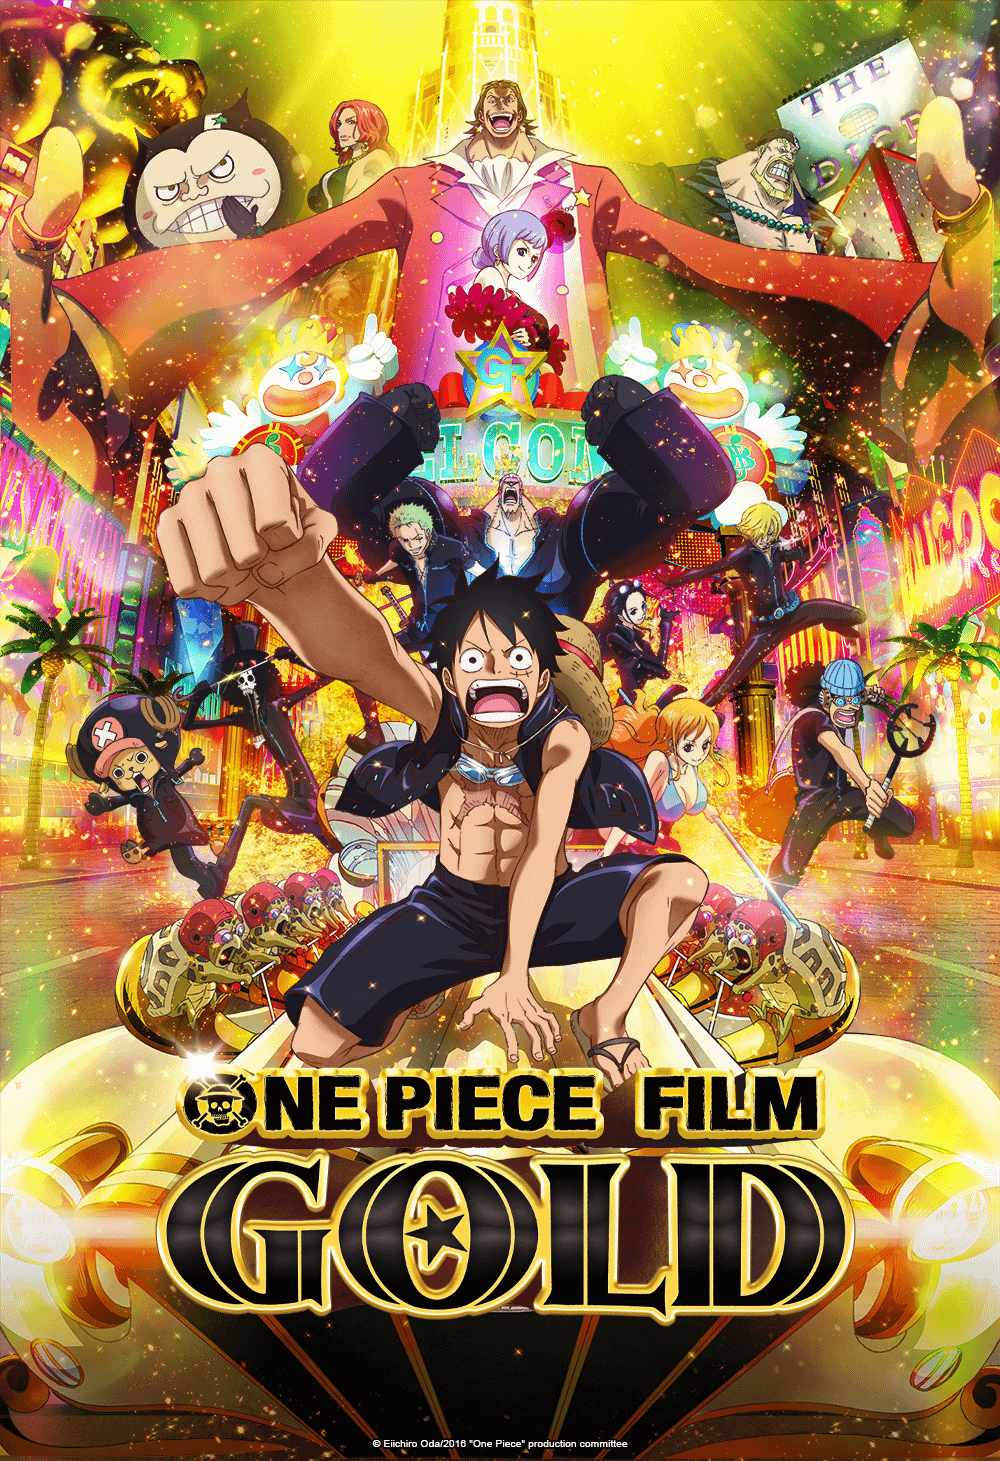 Crunchyroll have announced that they'll be adding One Piece